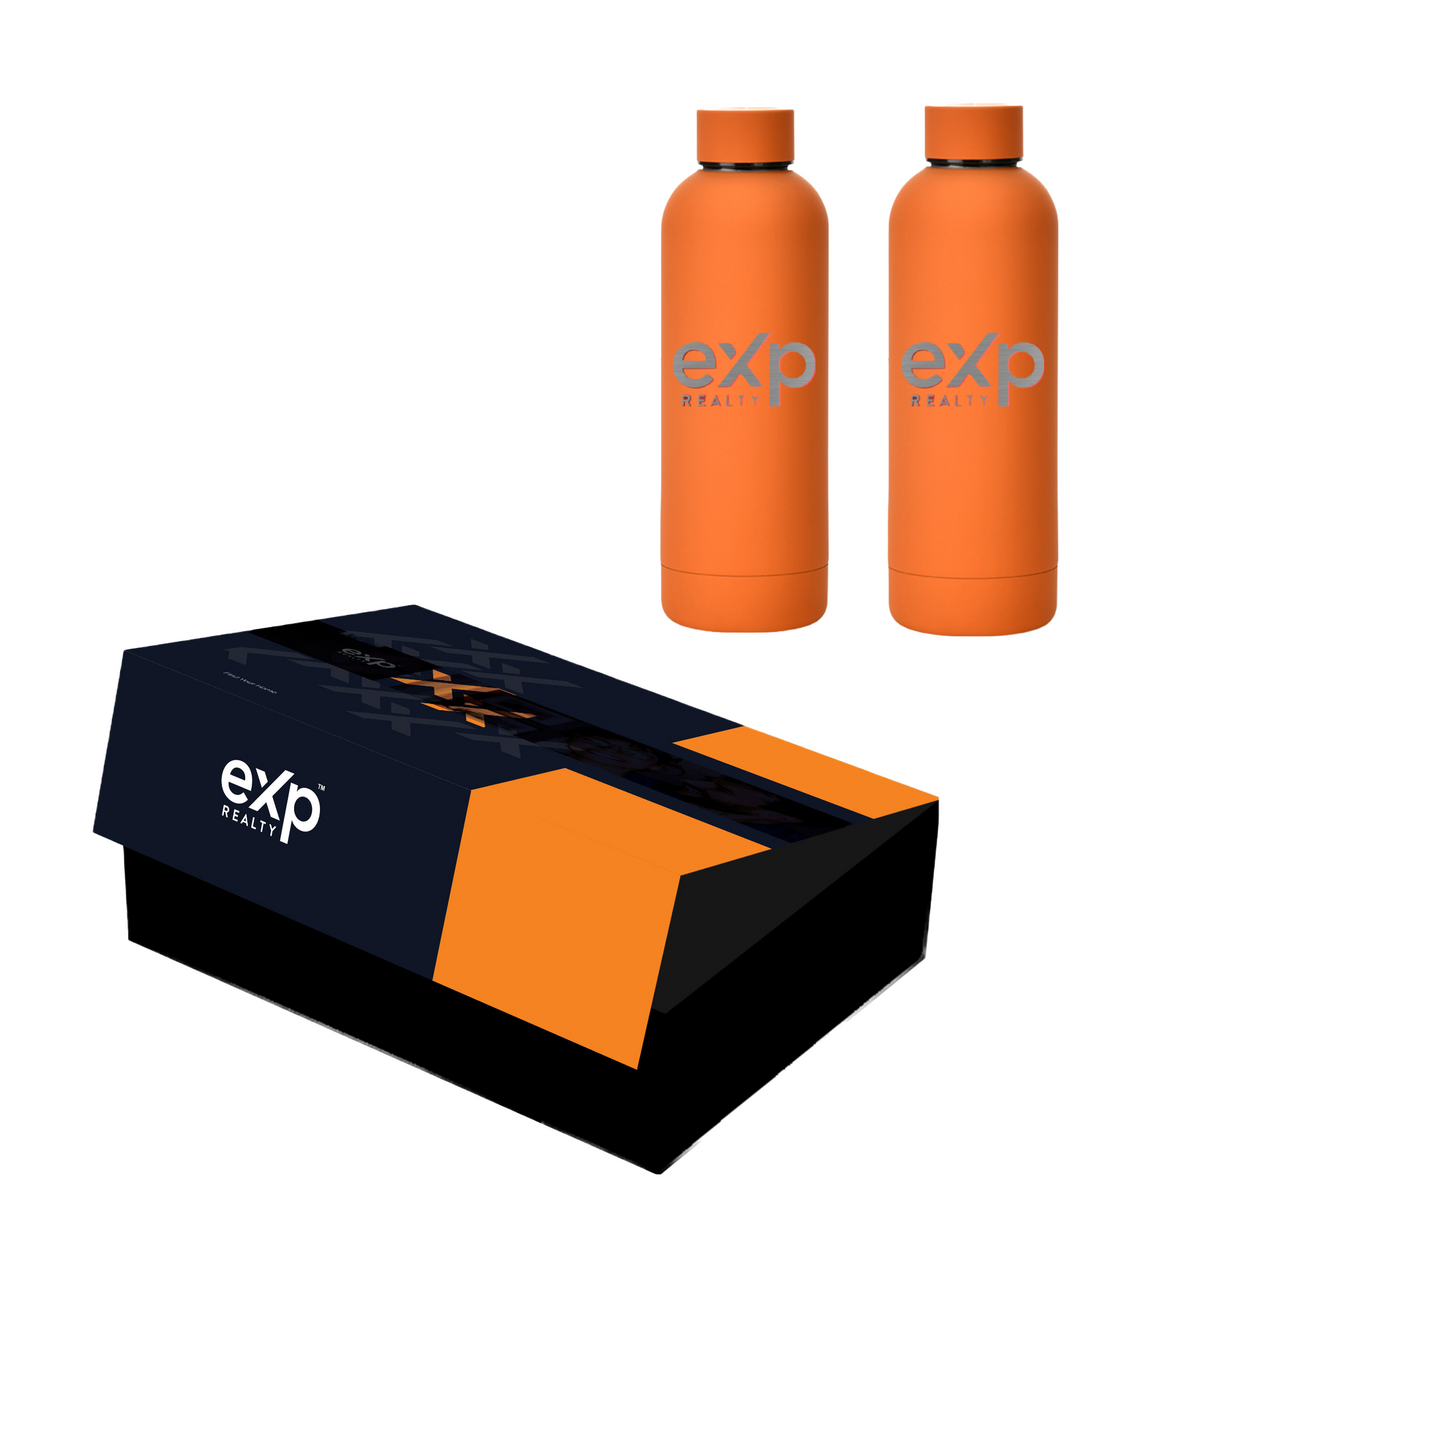 eXp Water Bottles in eXp Closing Gift Box (from $58 per complete box)